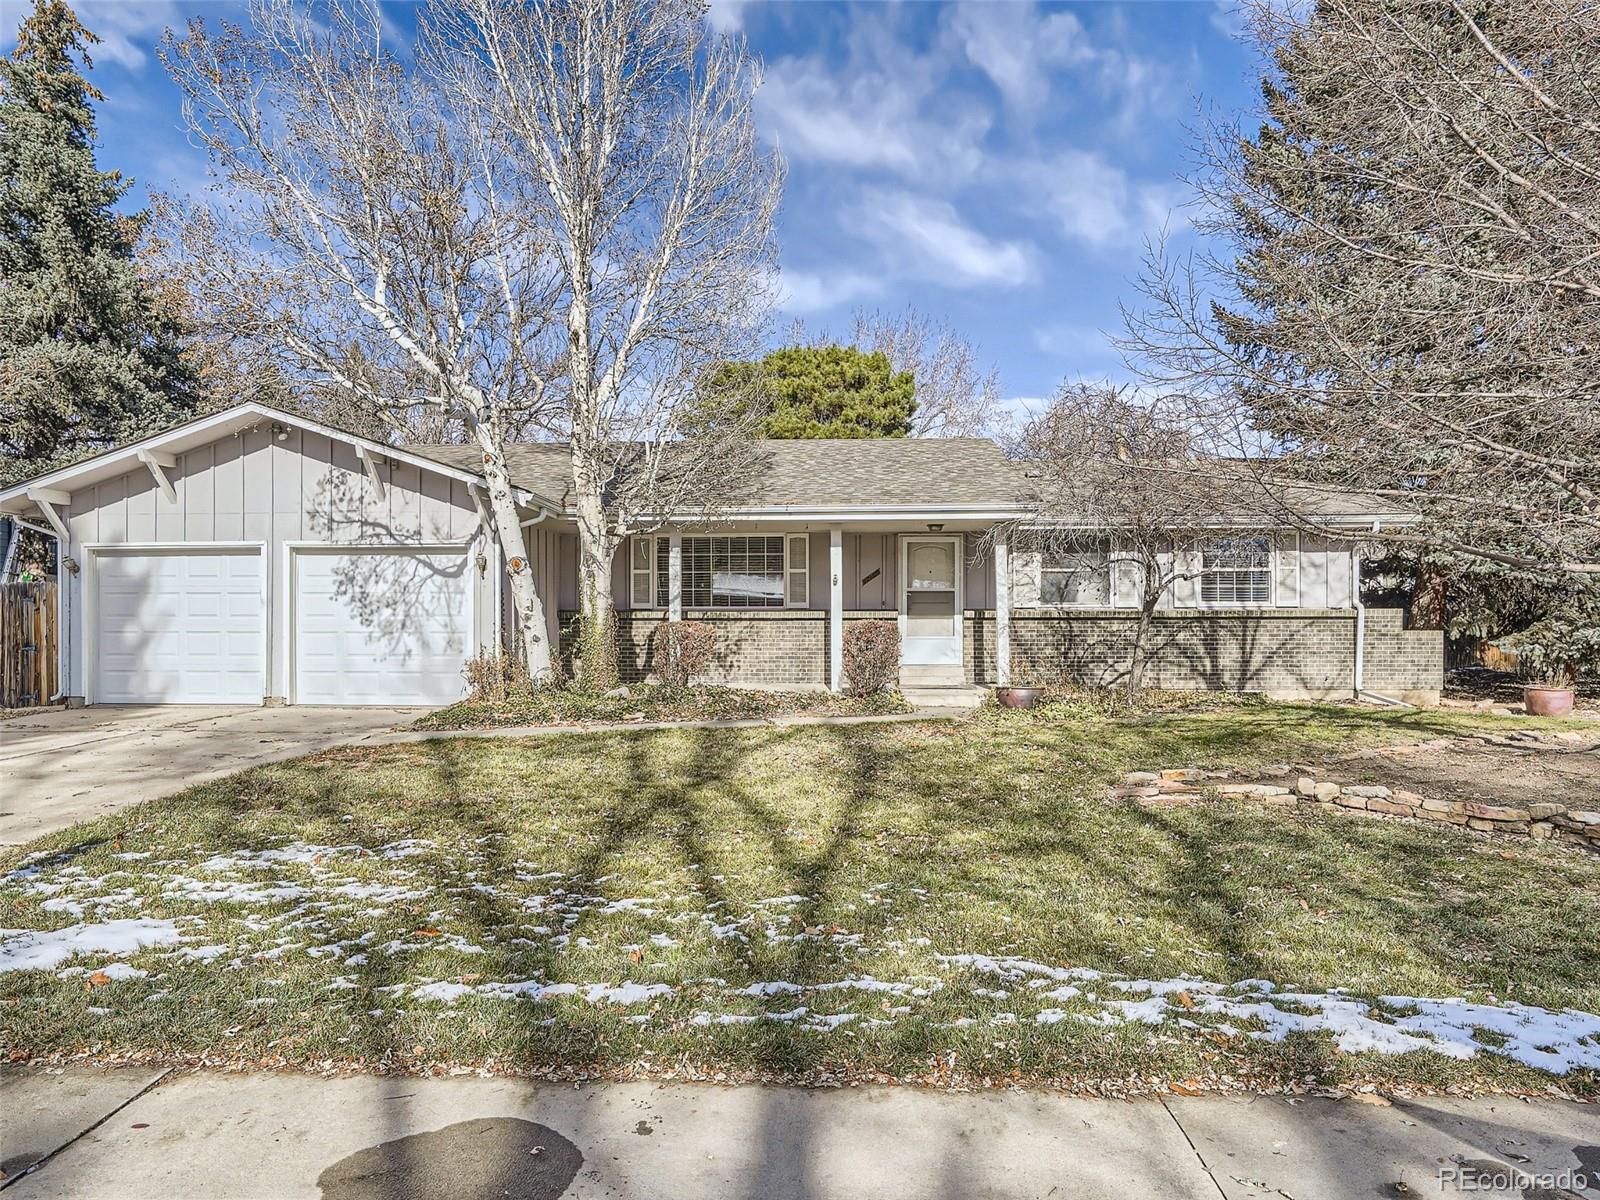 12165 W 68th Place, arvada MLS: 7793942 Beds: 4 Baths: 3 Price: $670,000